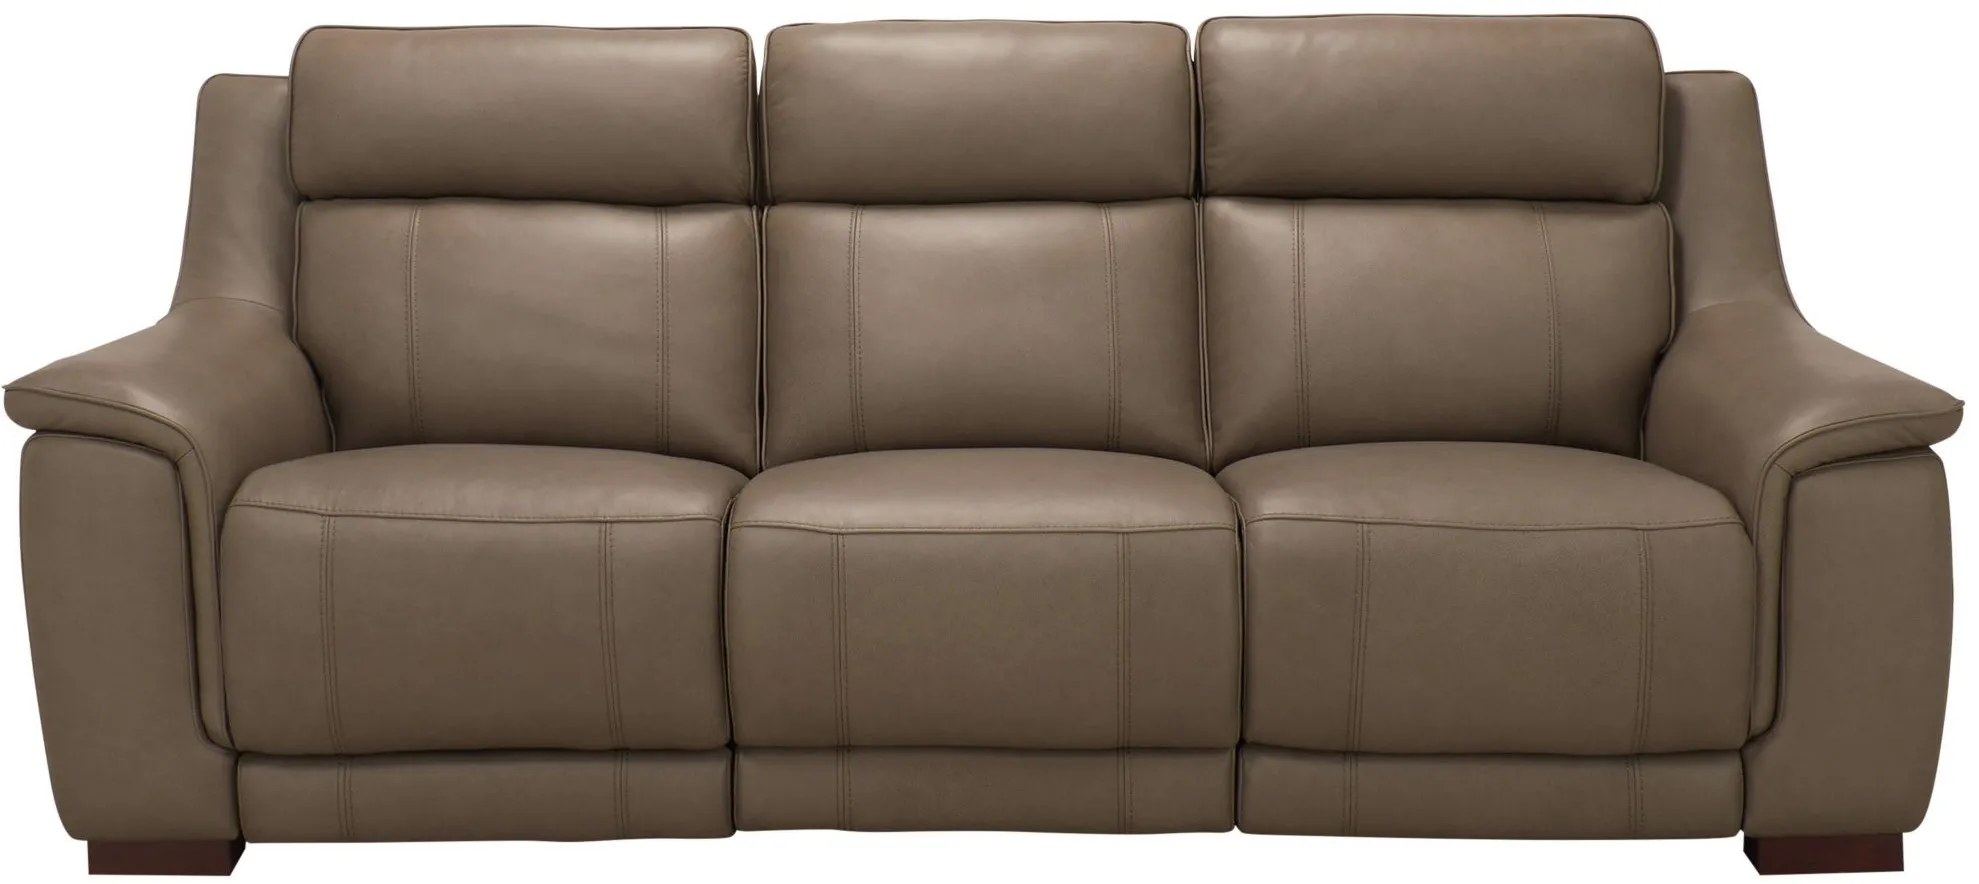 Griffith Power Sofa w/ Power Headrest in Brown by Bellanest